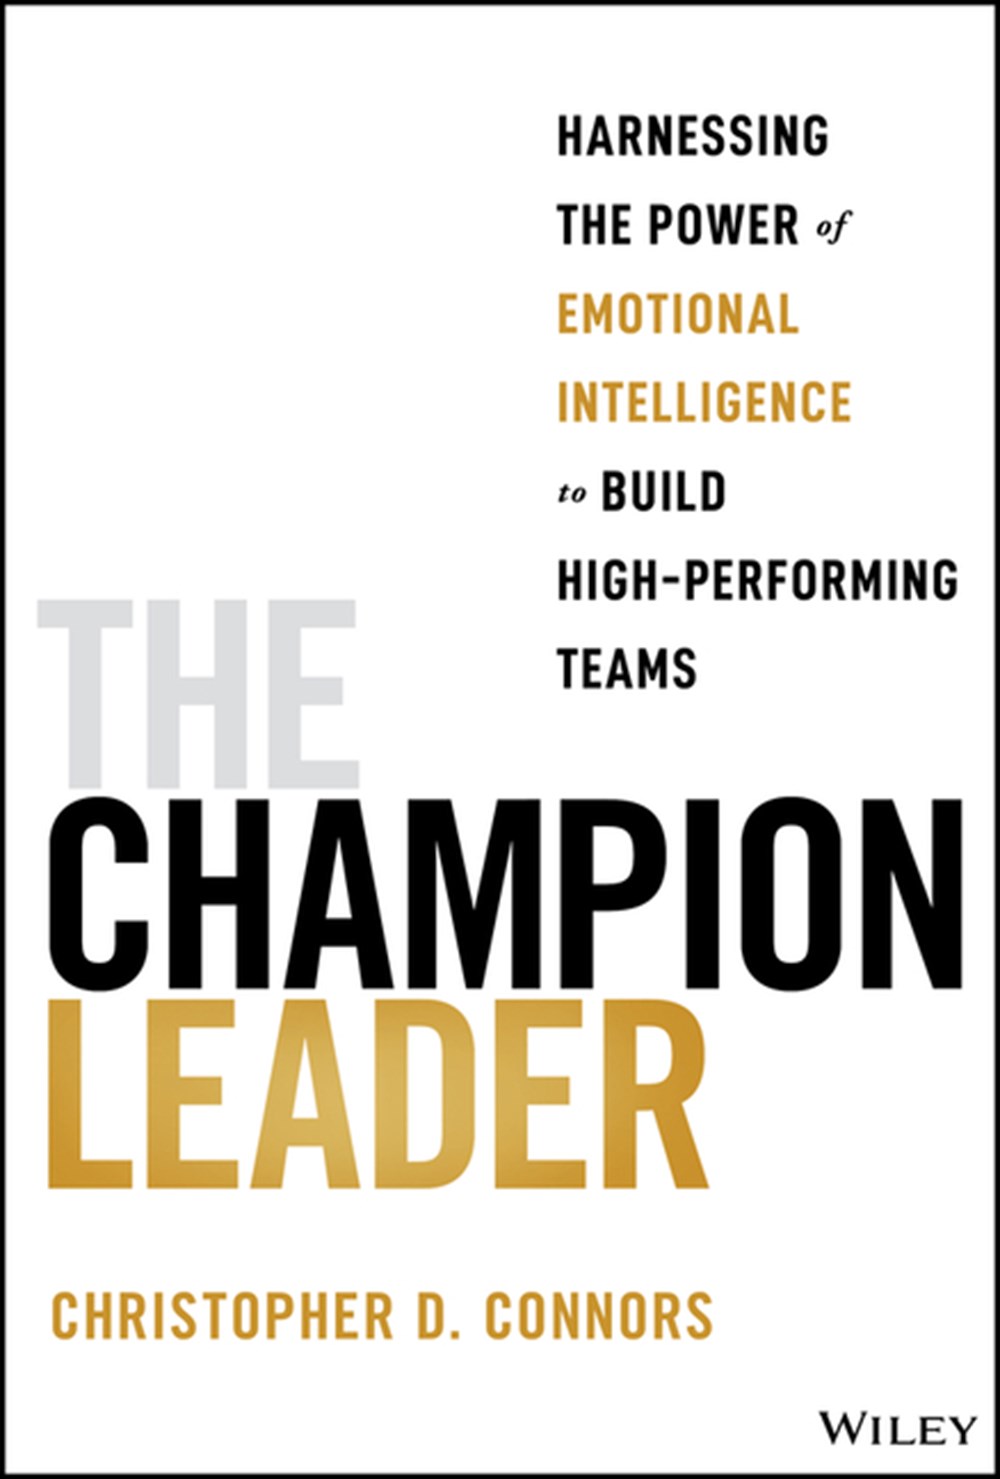 Champion Leader: Harnessing the Power of Emotional Intelligence to Build High-Performing Teams